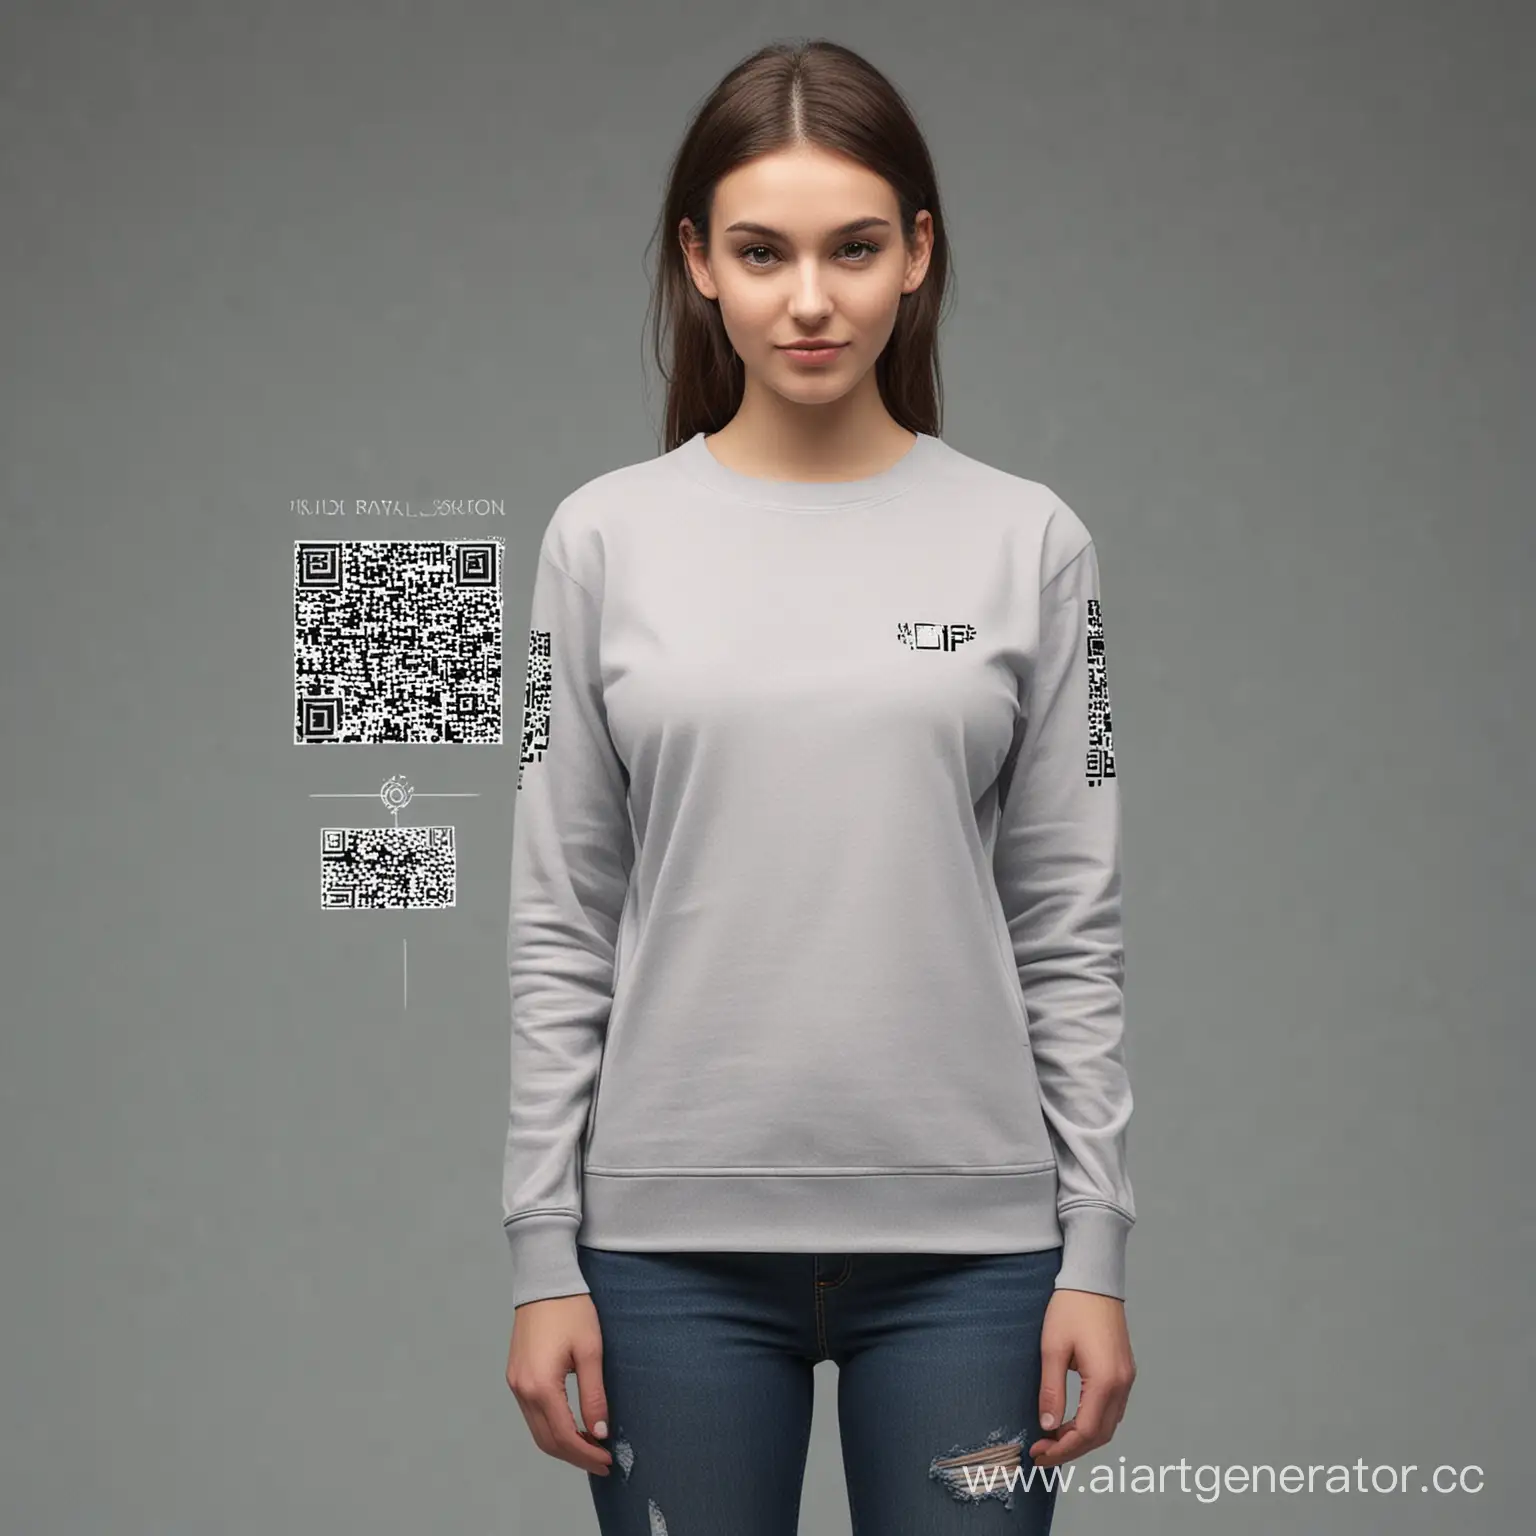 Interactive-Clothing-Line-NovFZ-Connecting-Through-Style-with-QR-Codes